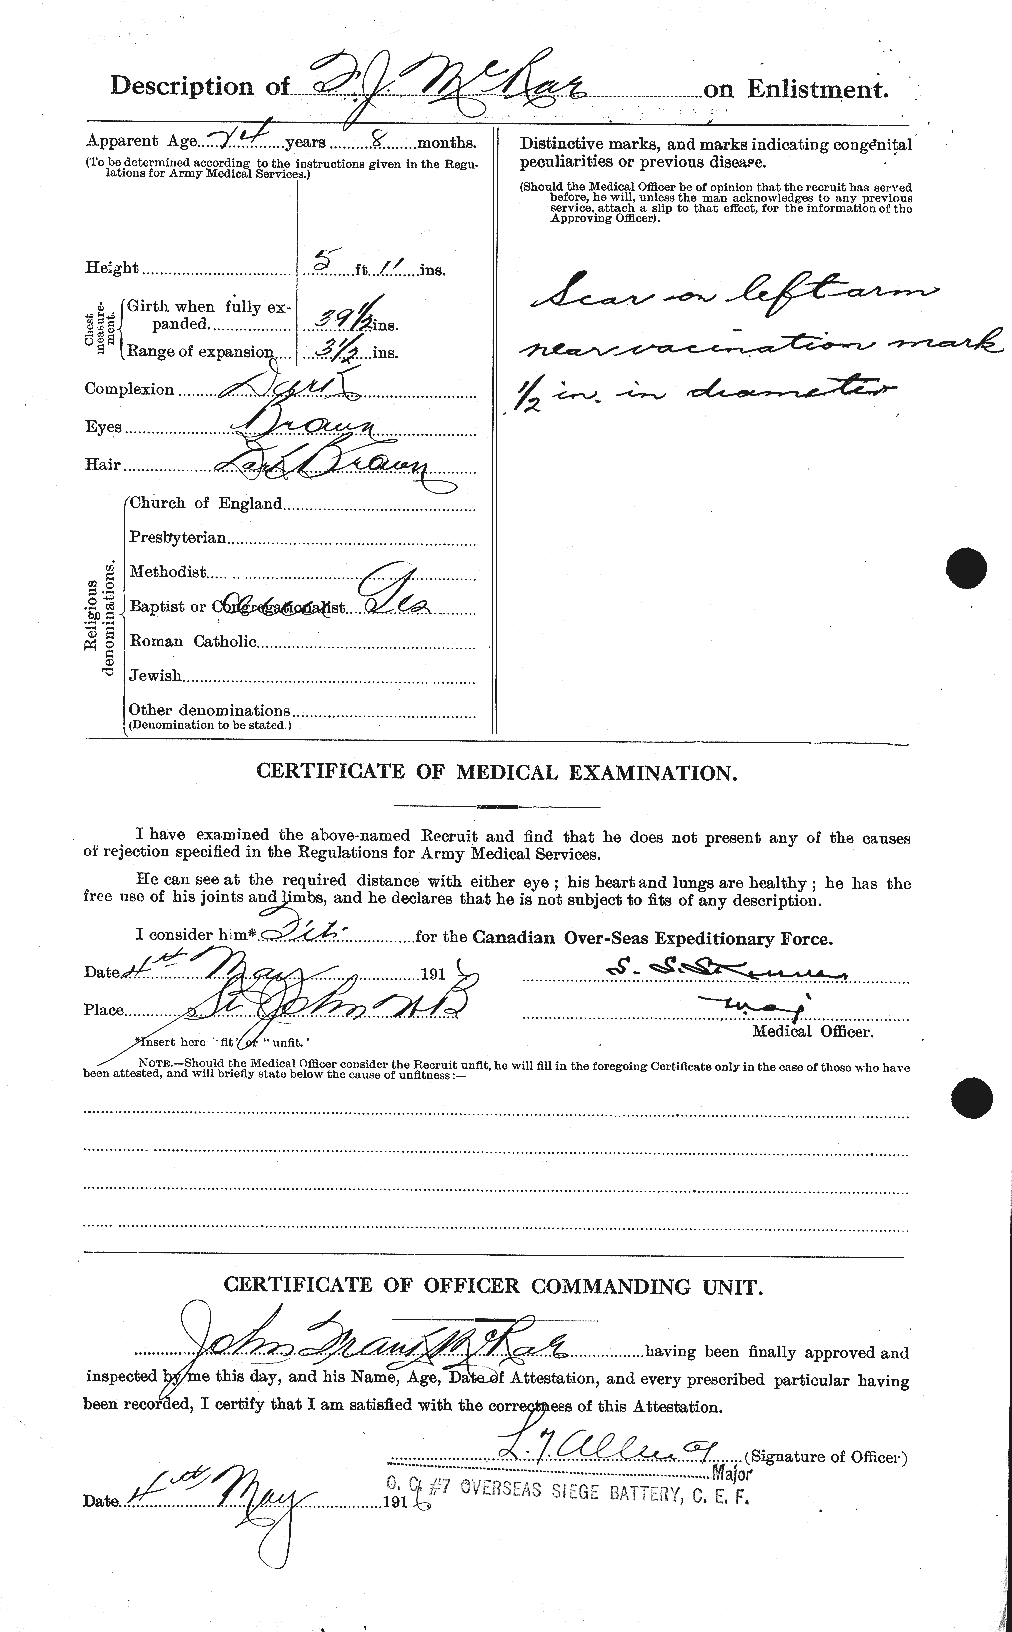 Personnel Records of the First World War - CEF 542839b